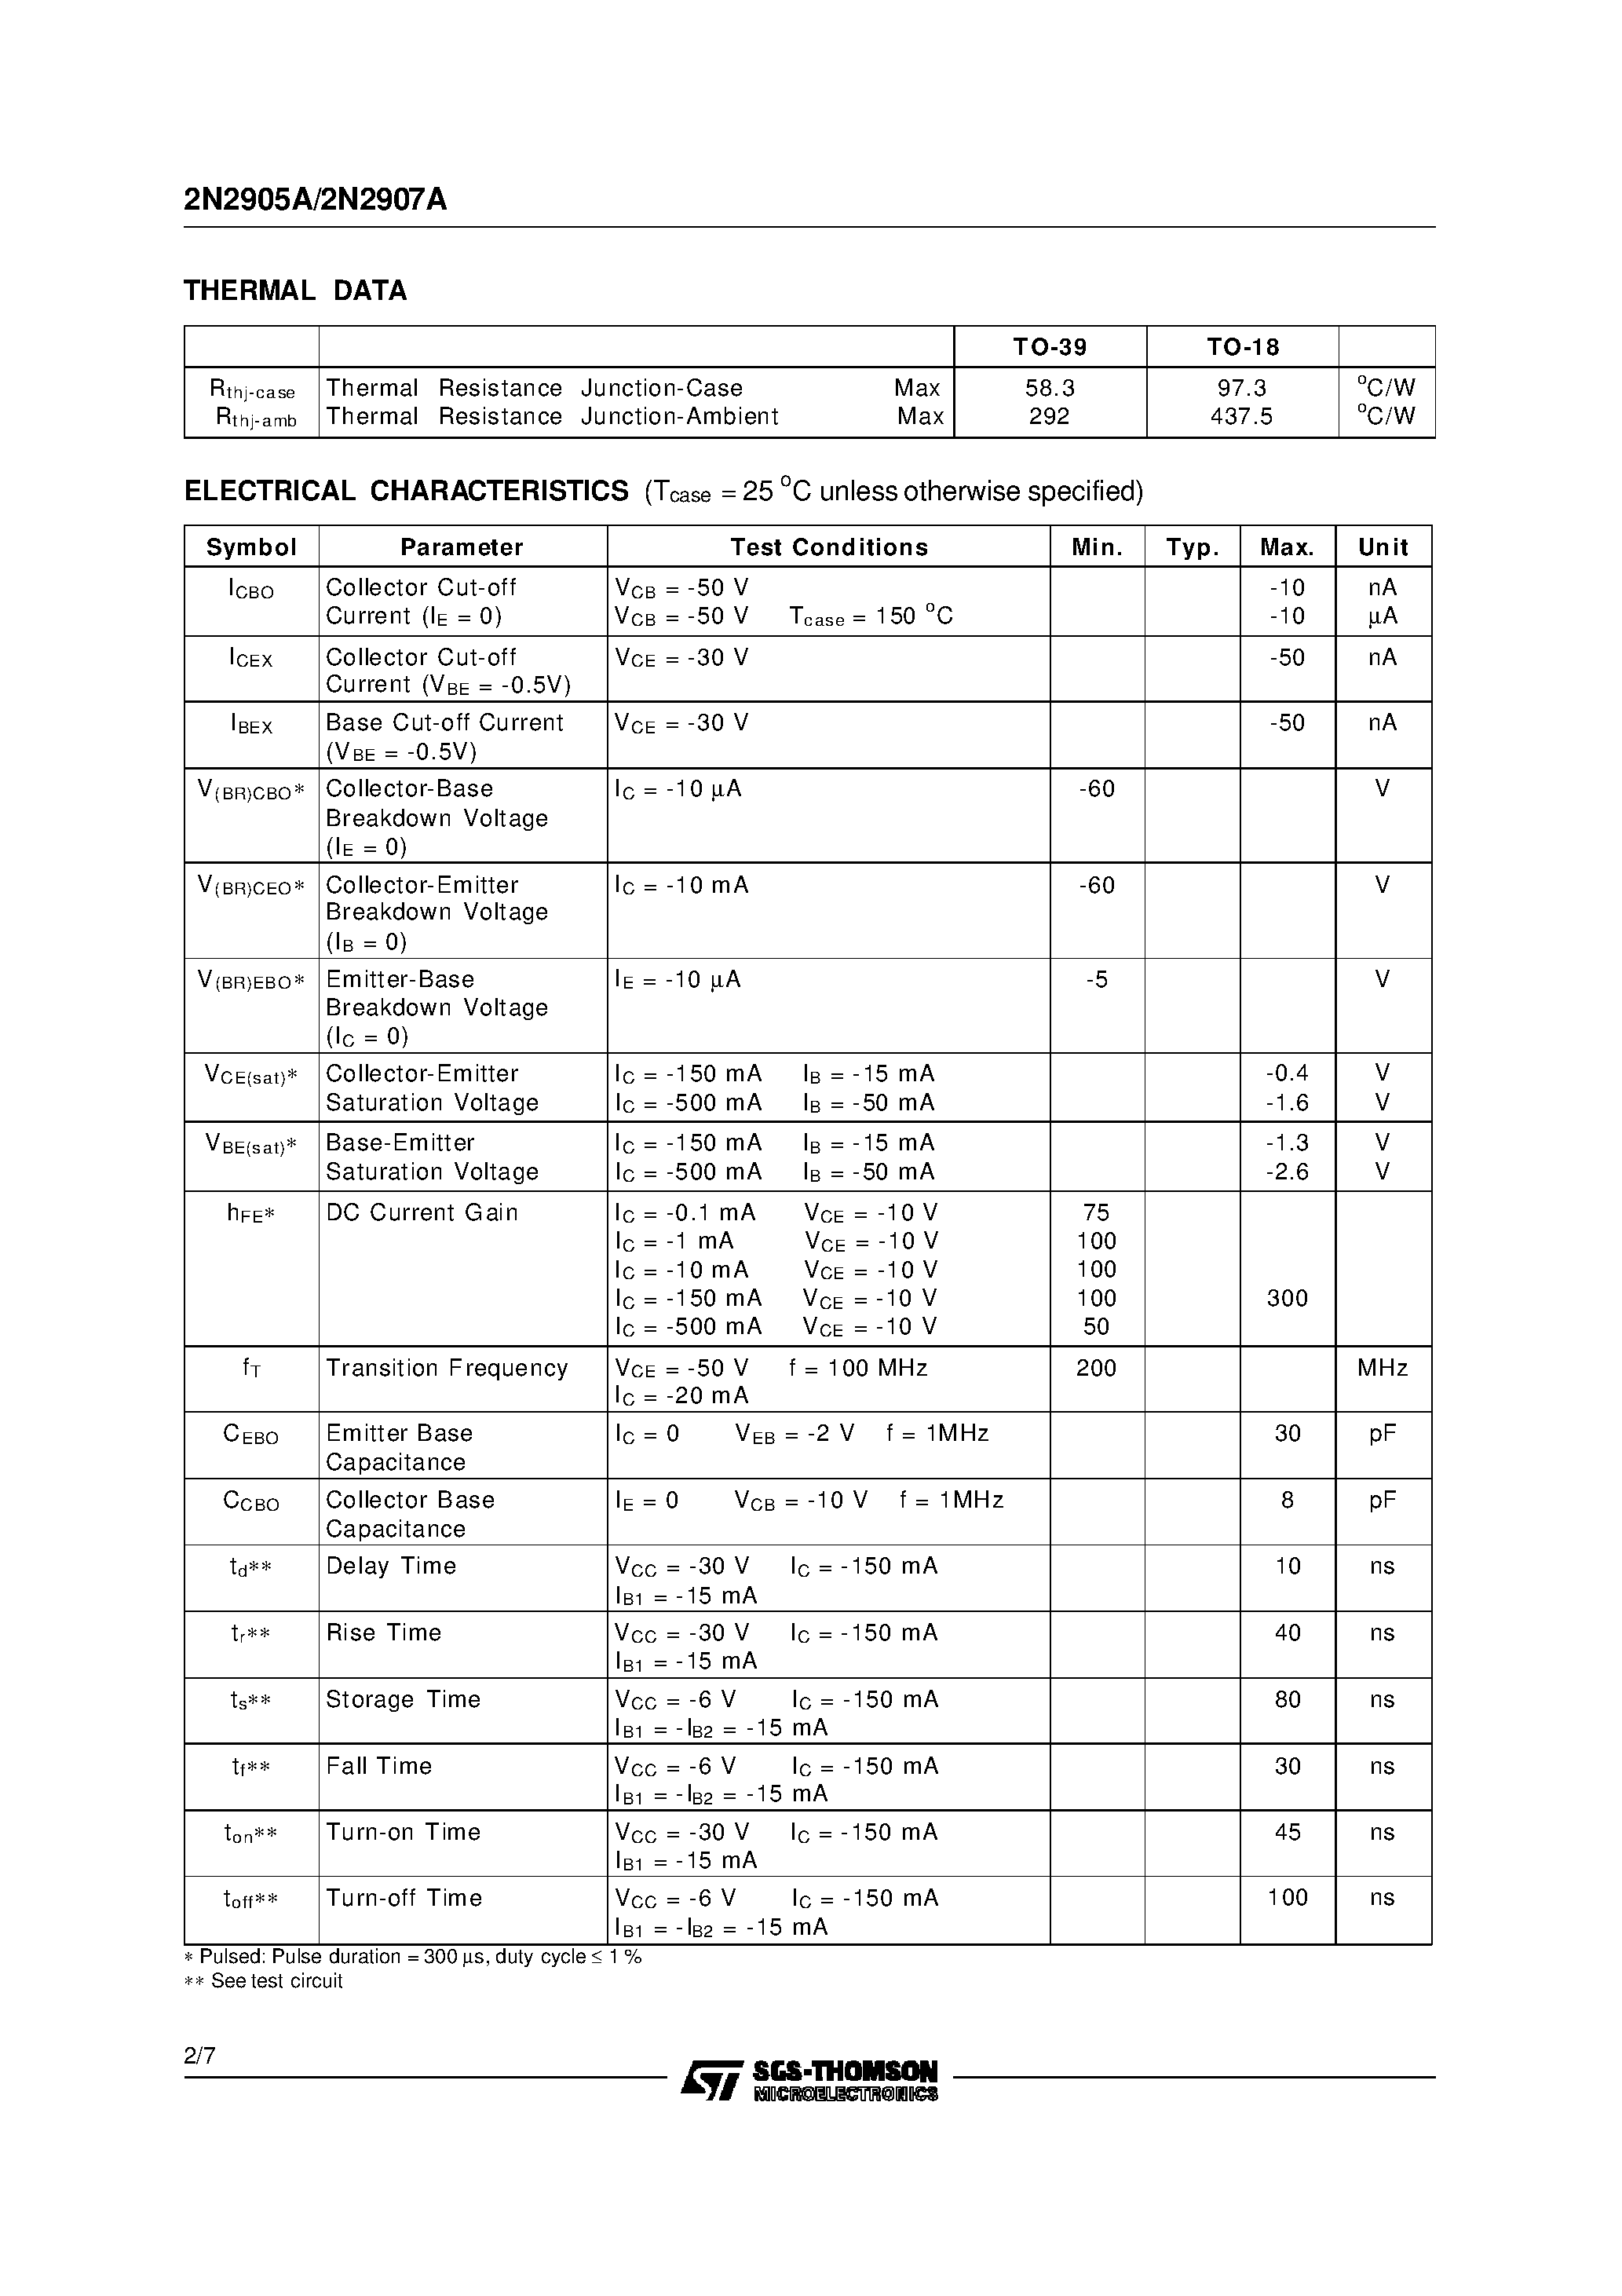 Datasheet 2N2907A - GENERAL PURPOSE AMPLIFIERS AND SWITCHES page 2